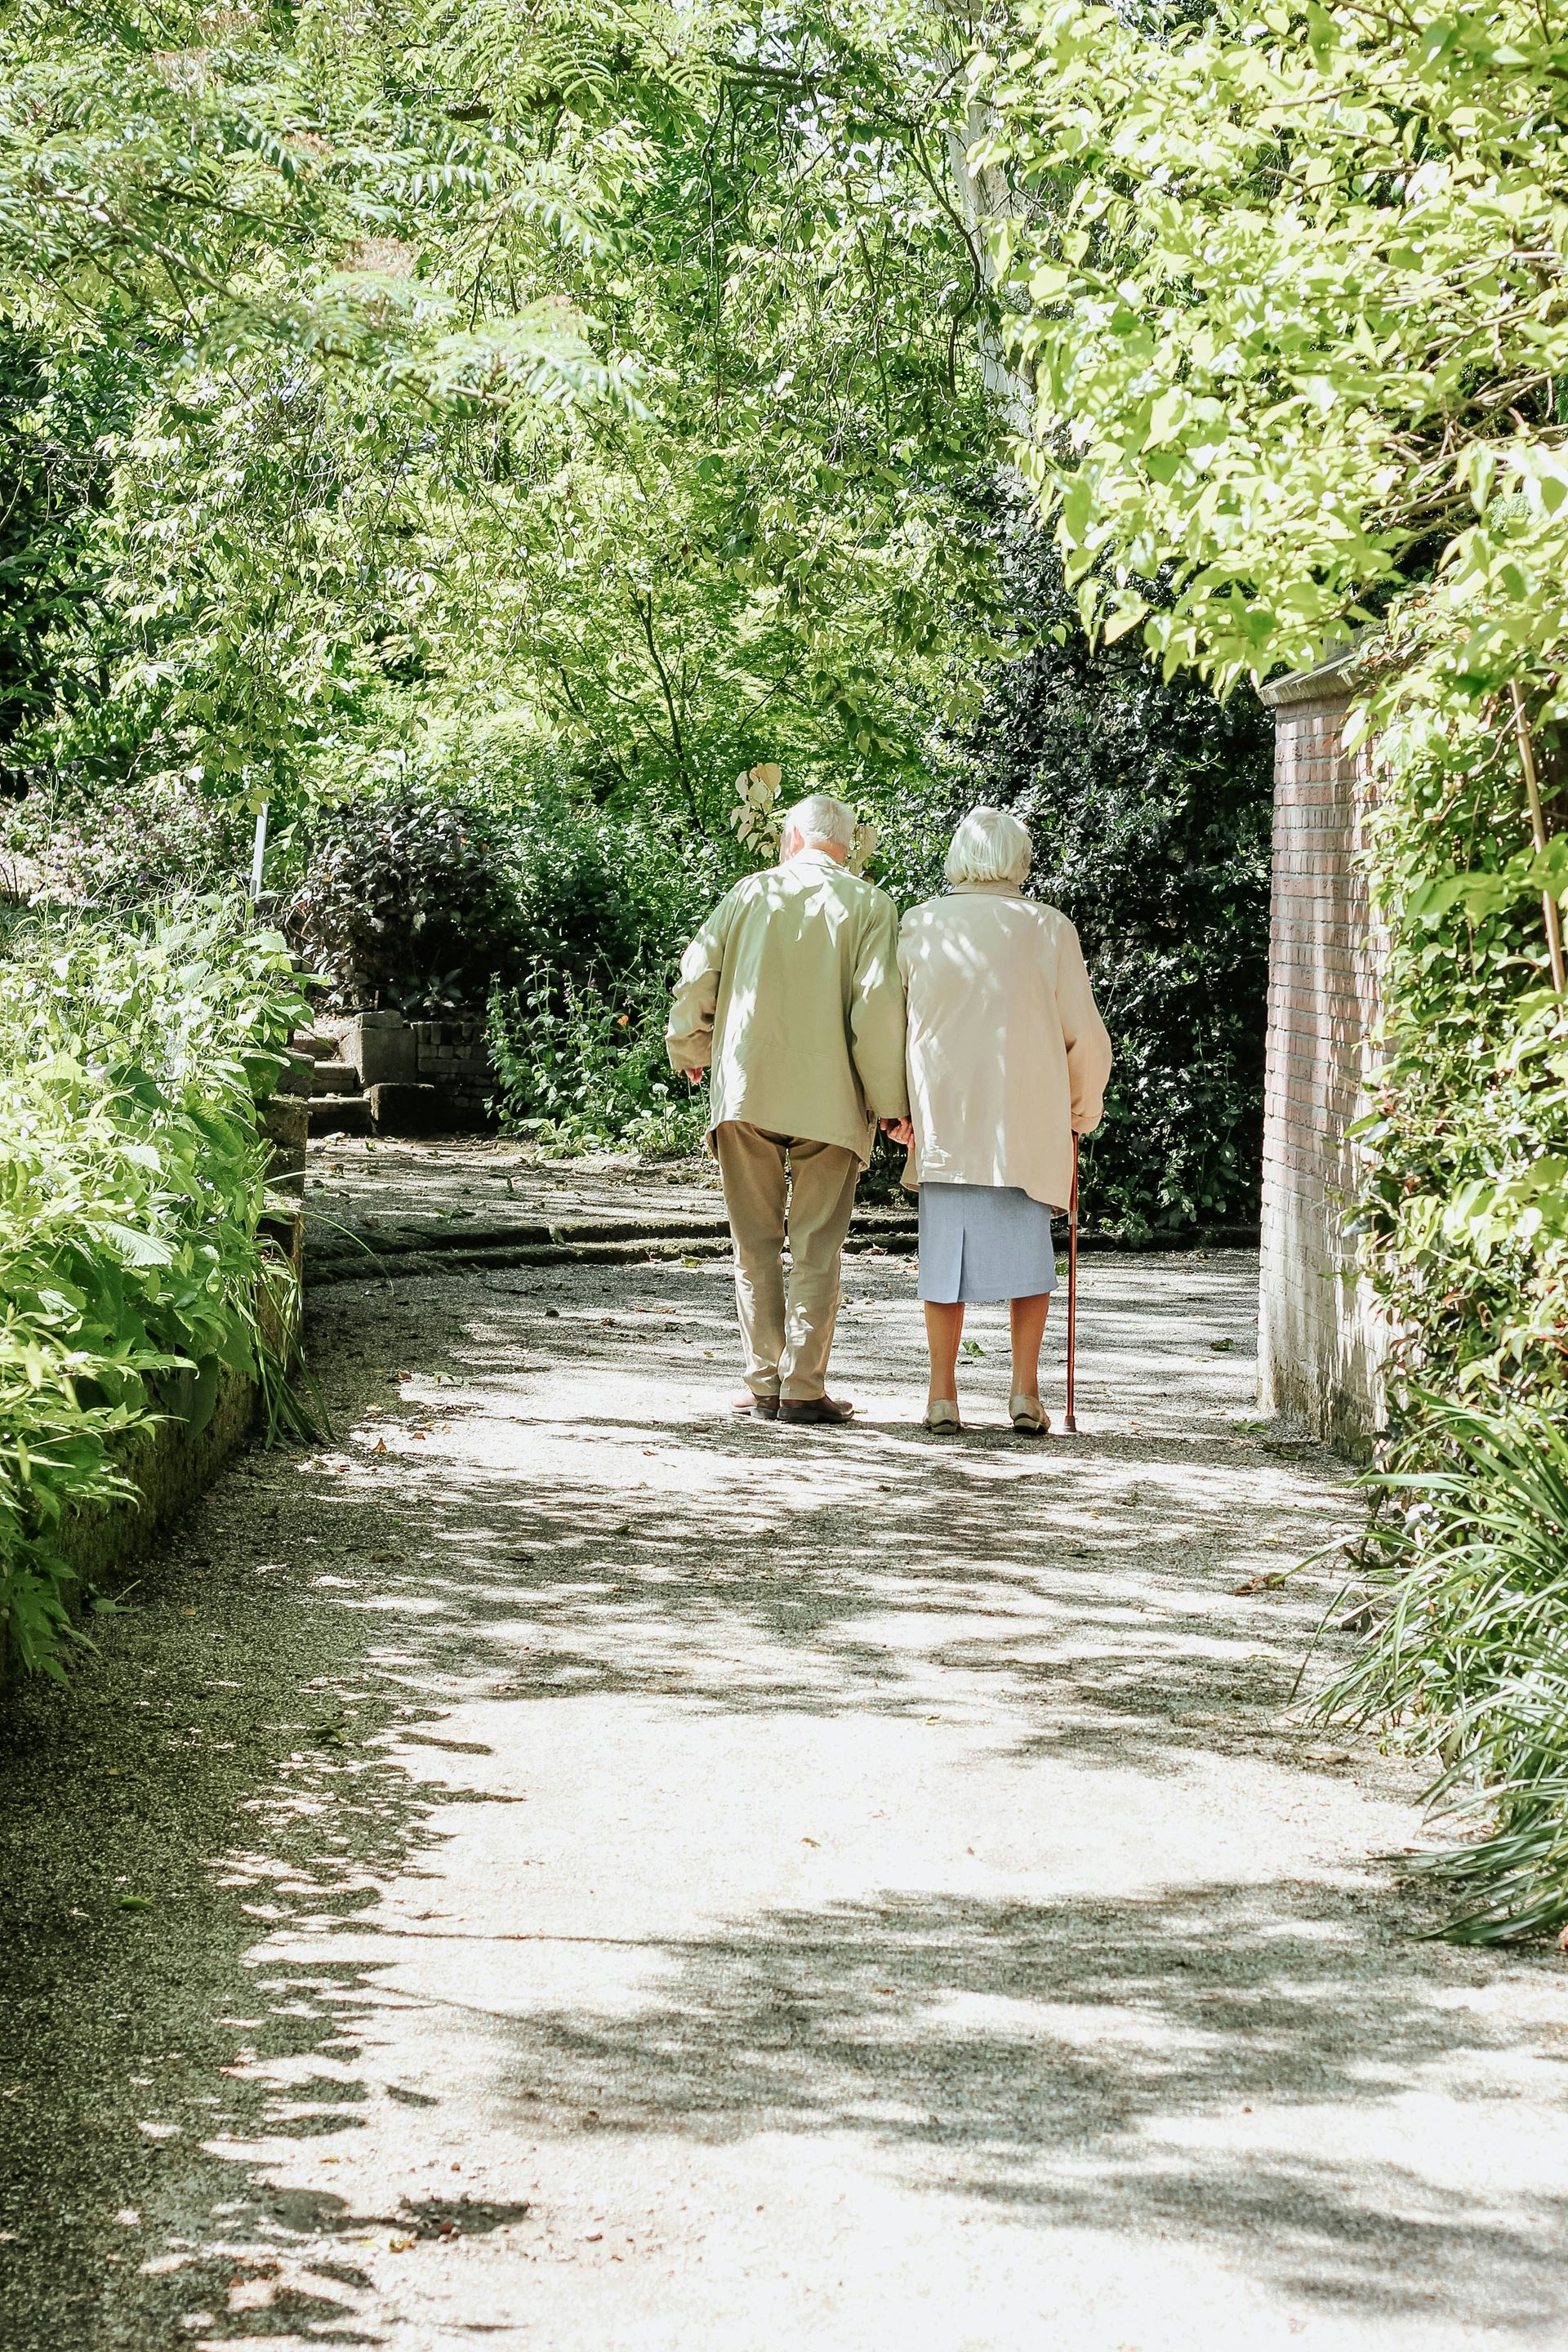 Elderly couple going for a walk